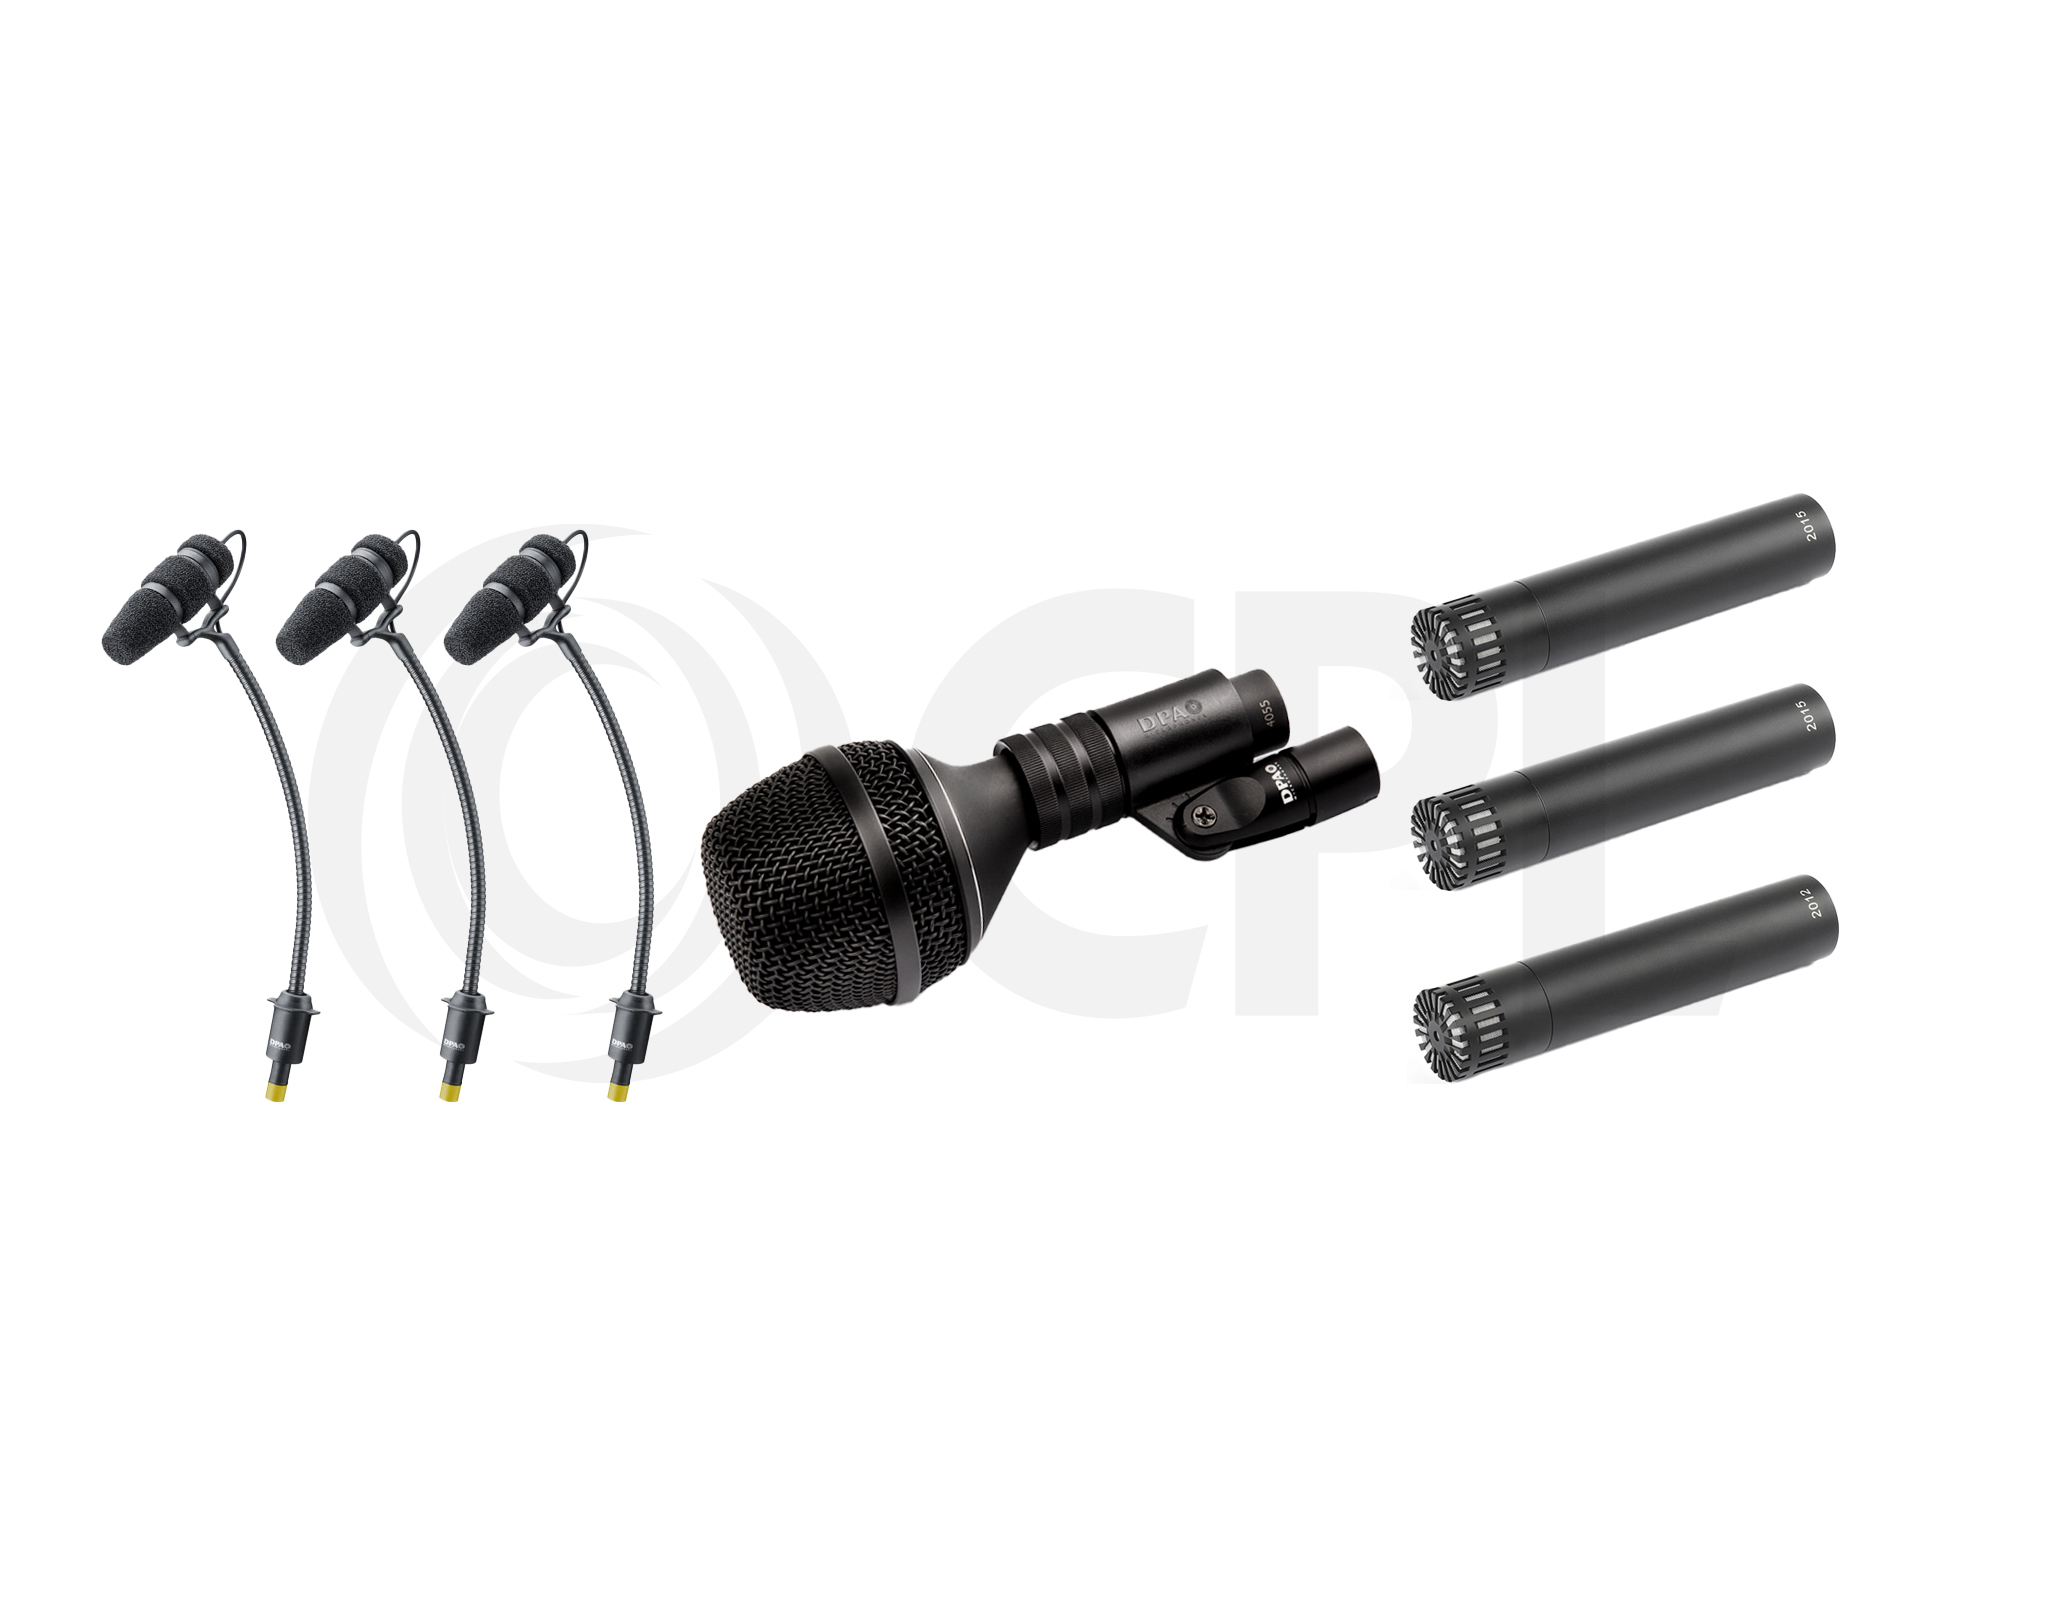 DPA DDK4000 Drum Microphone Kit containing 3 x 4099, 1 x 4055, 2 x 2015 and 1 x 2012